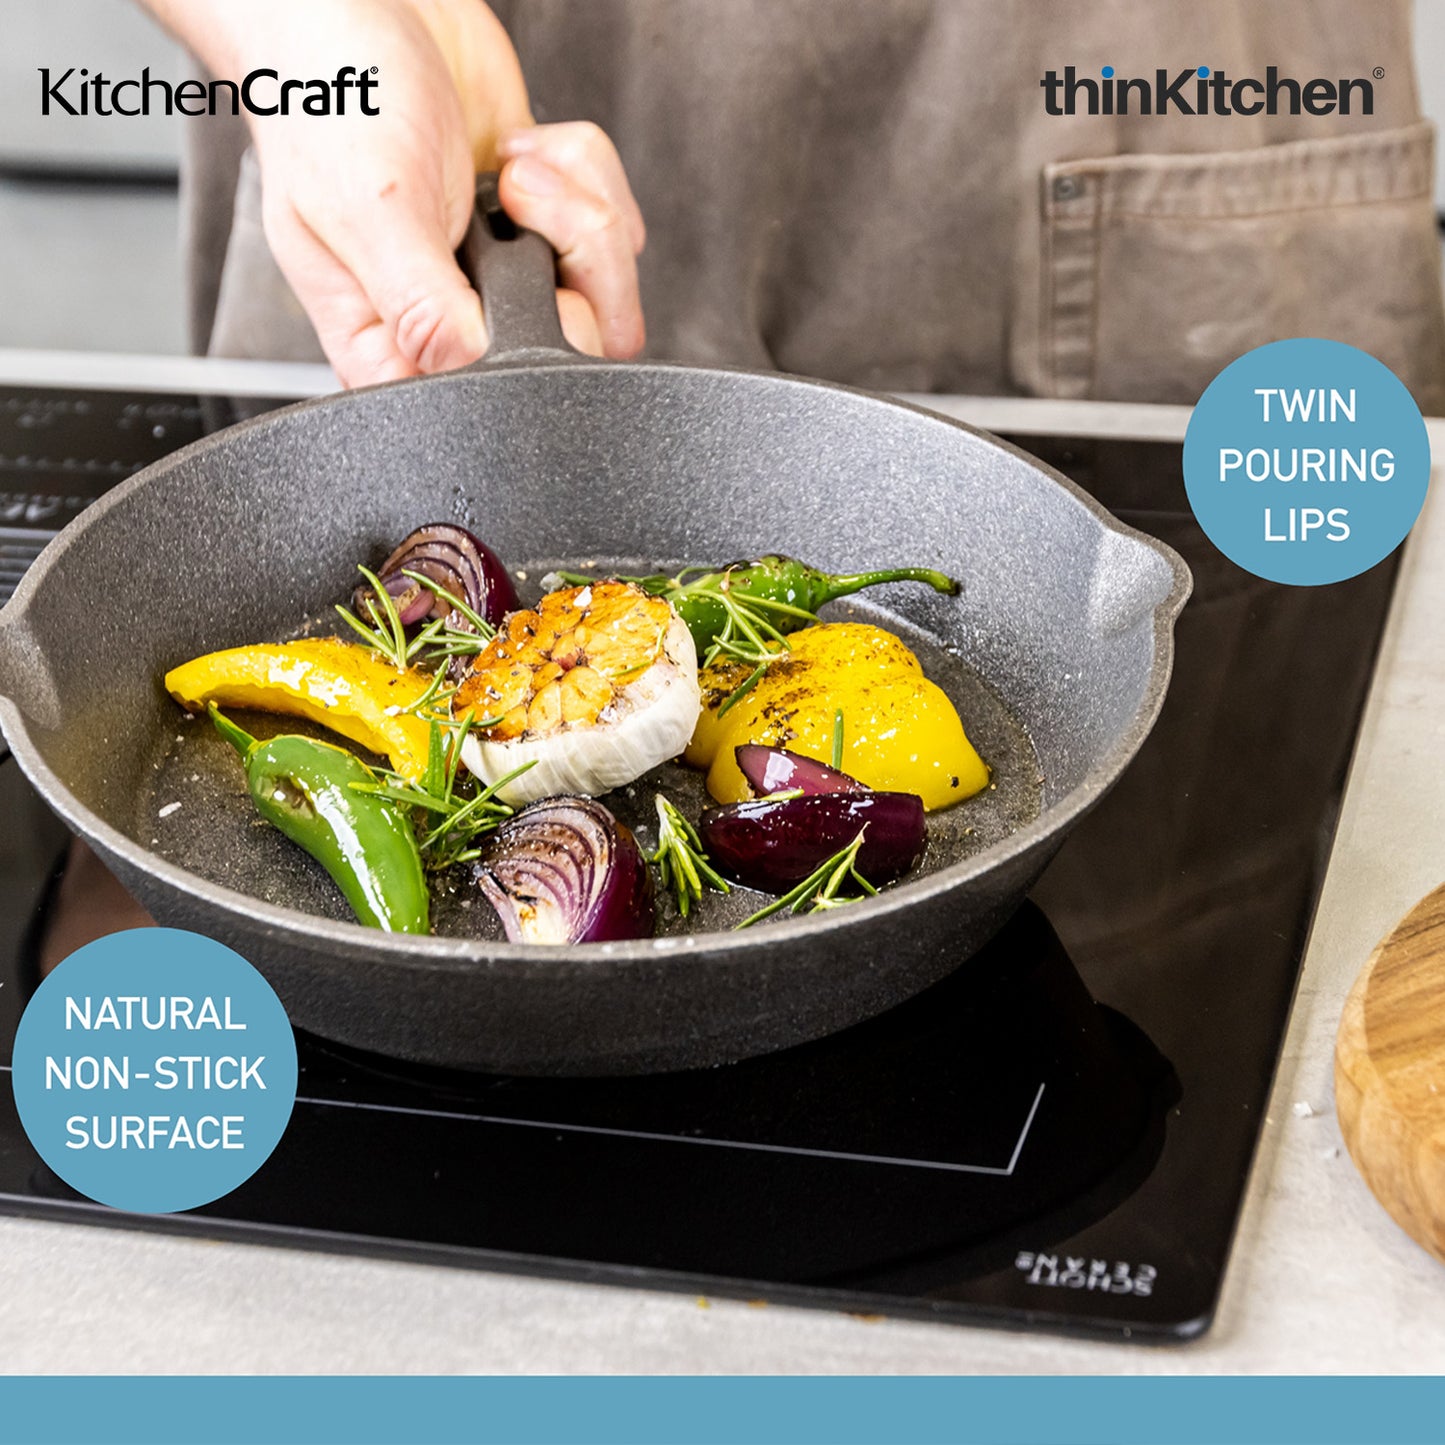 Kitchencraft Deluxe Grill Pan 24cm